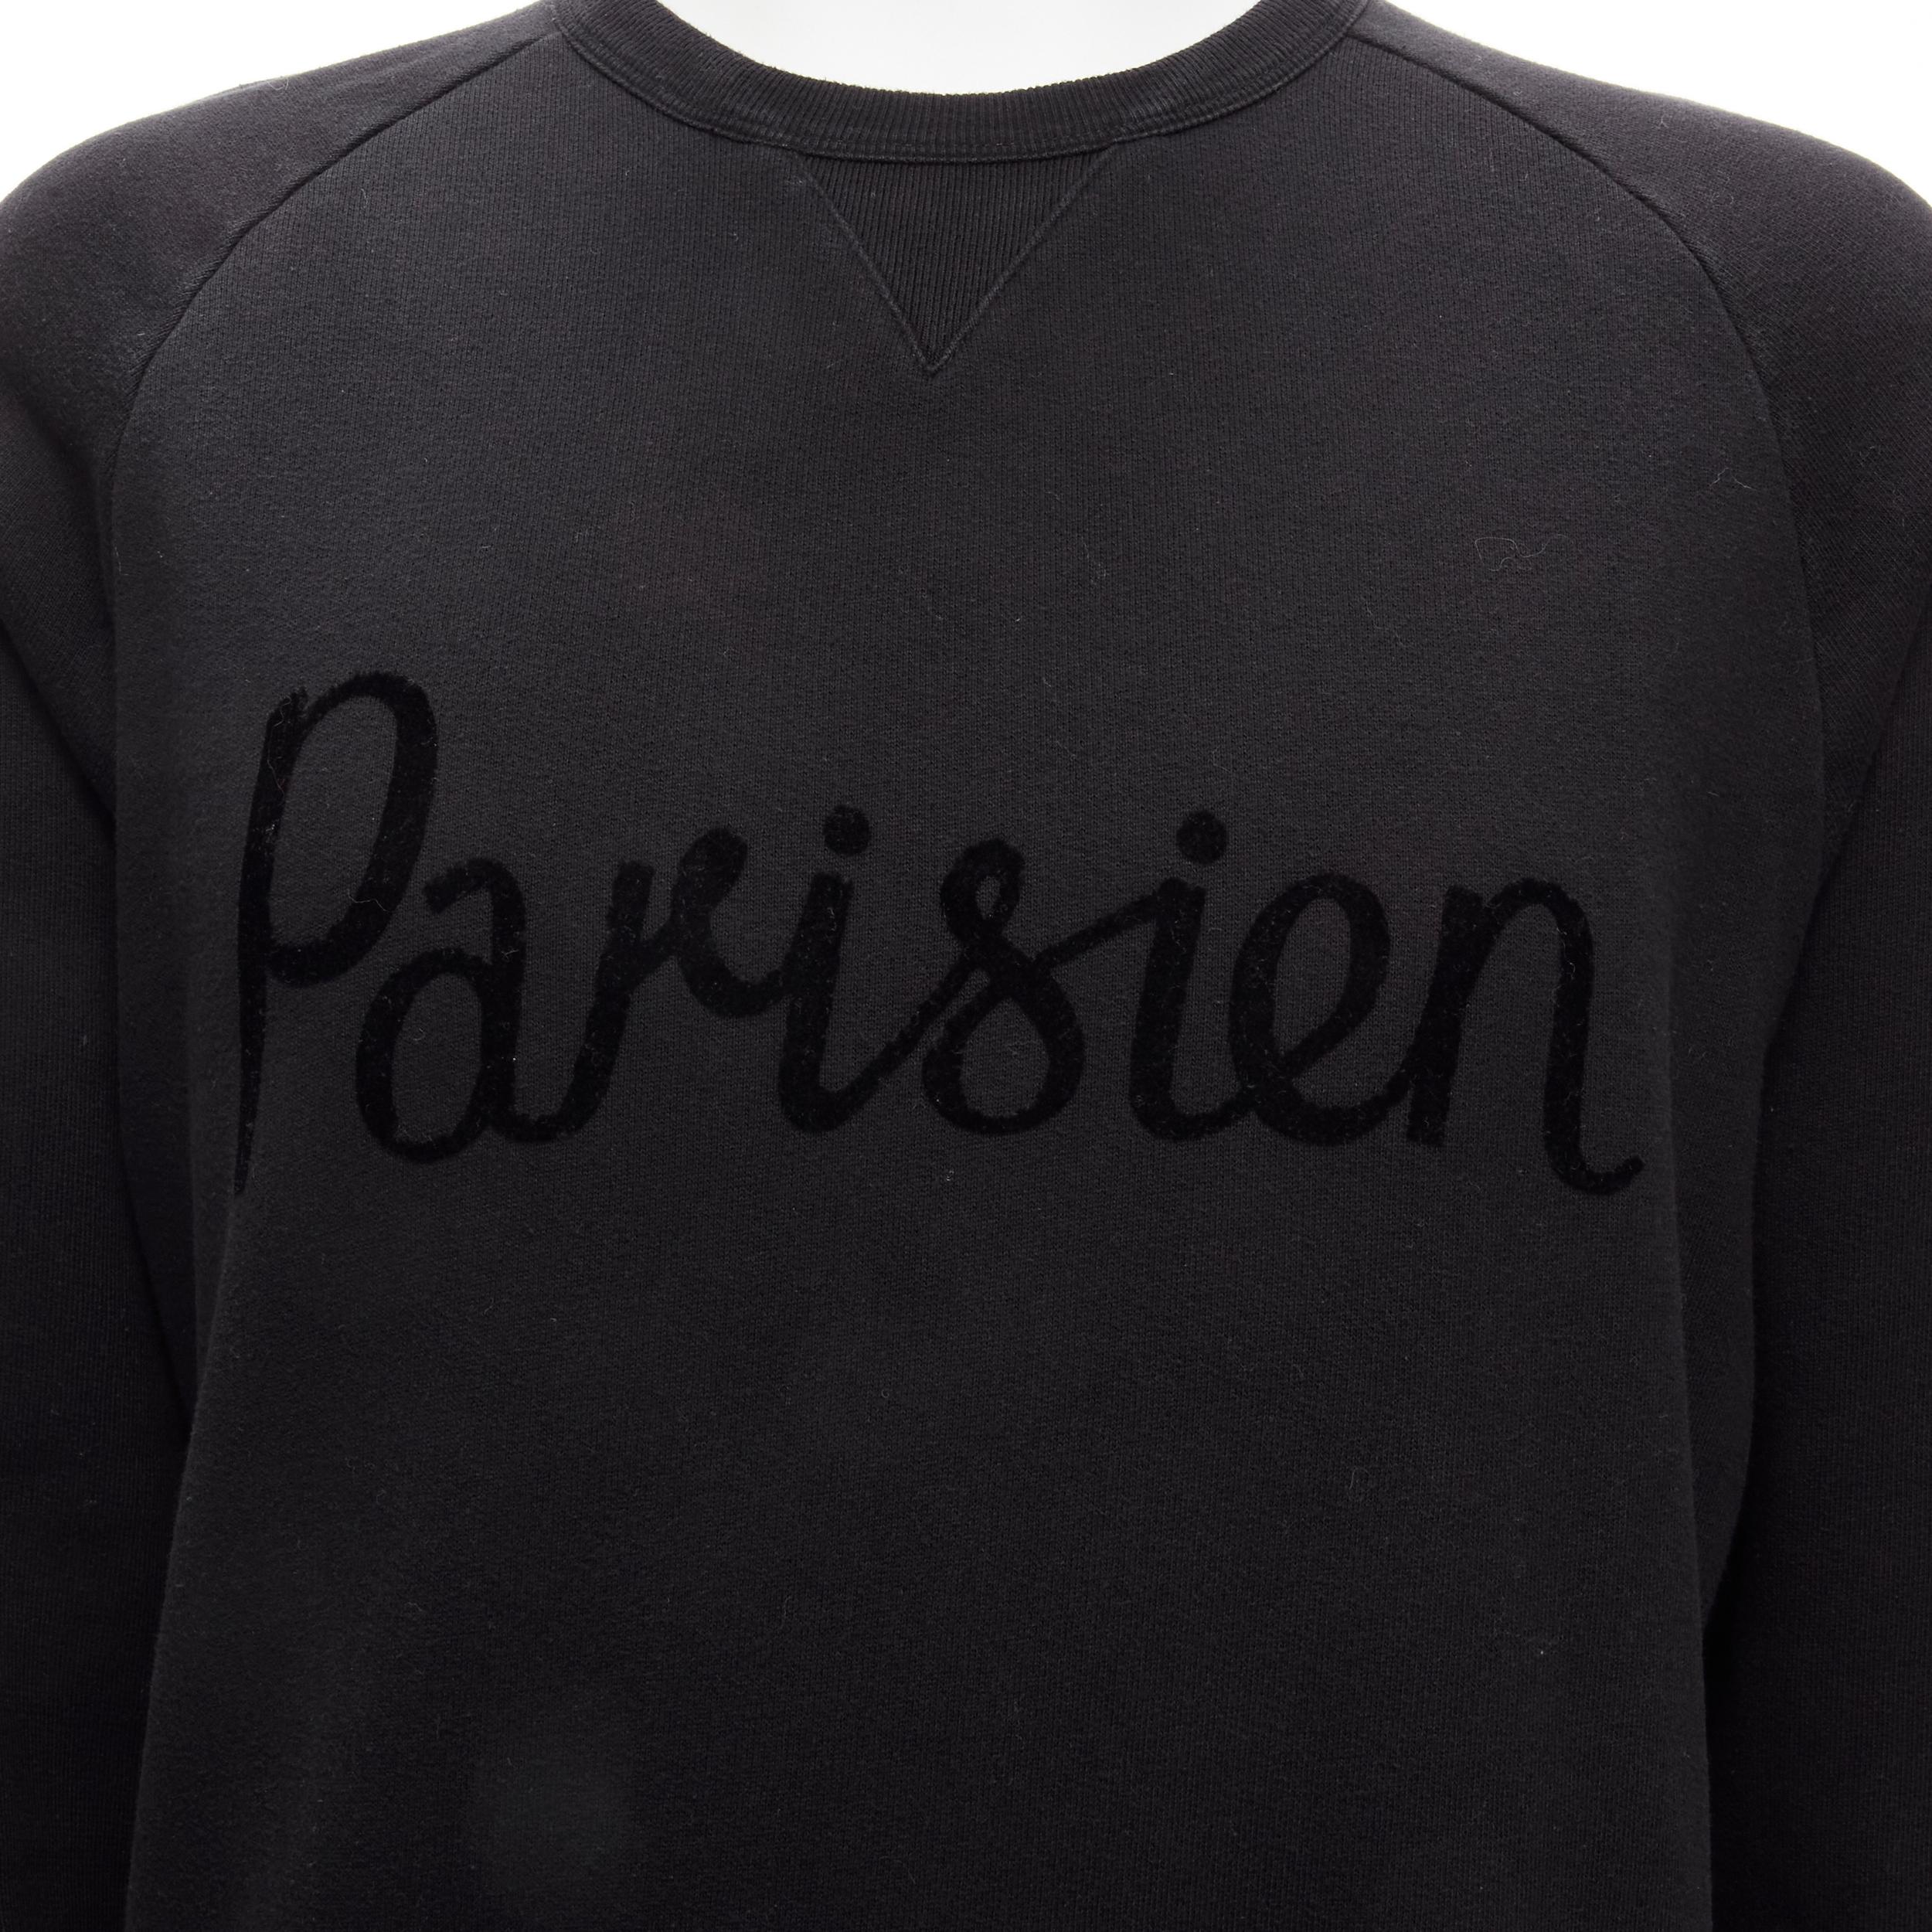 MAISON KITSUNE black velvet Parisien applique cotton crew sweatshirt M
Reference: YNWG/A00105
Brand: Maison Kitsune
Material: Cotton
Color: Black
Pattern: Solid
Closure: Pullover
Made in: Portugal

CONDITION:
Condition: Good, this item was pre-owned